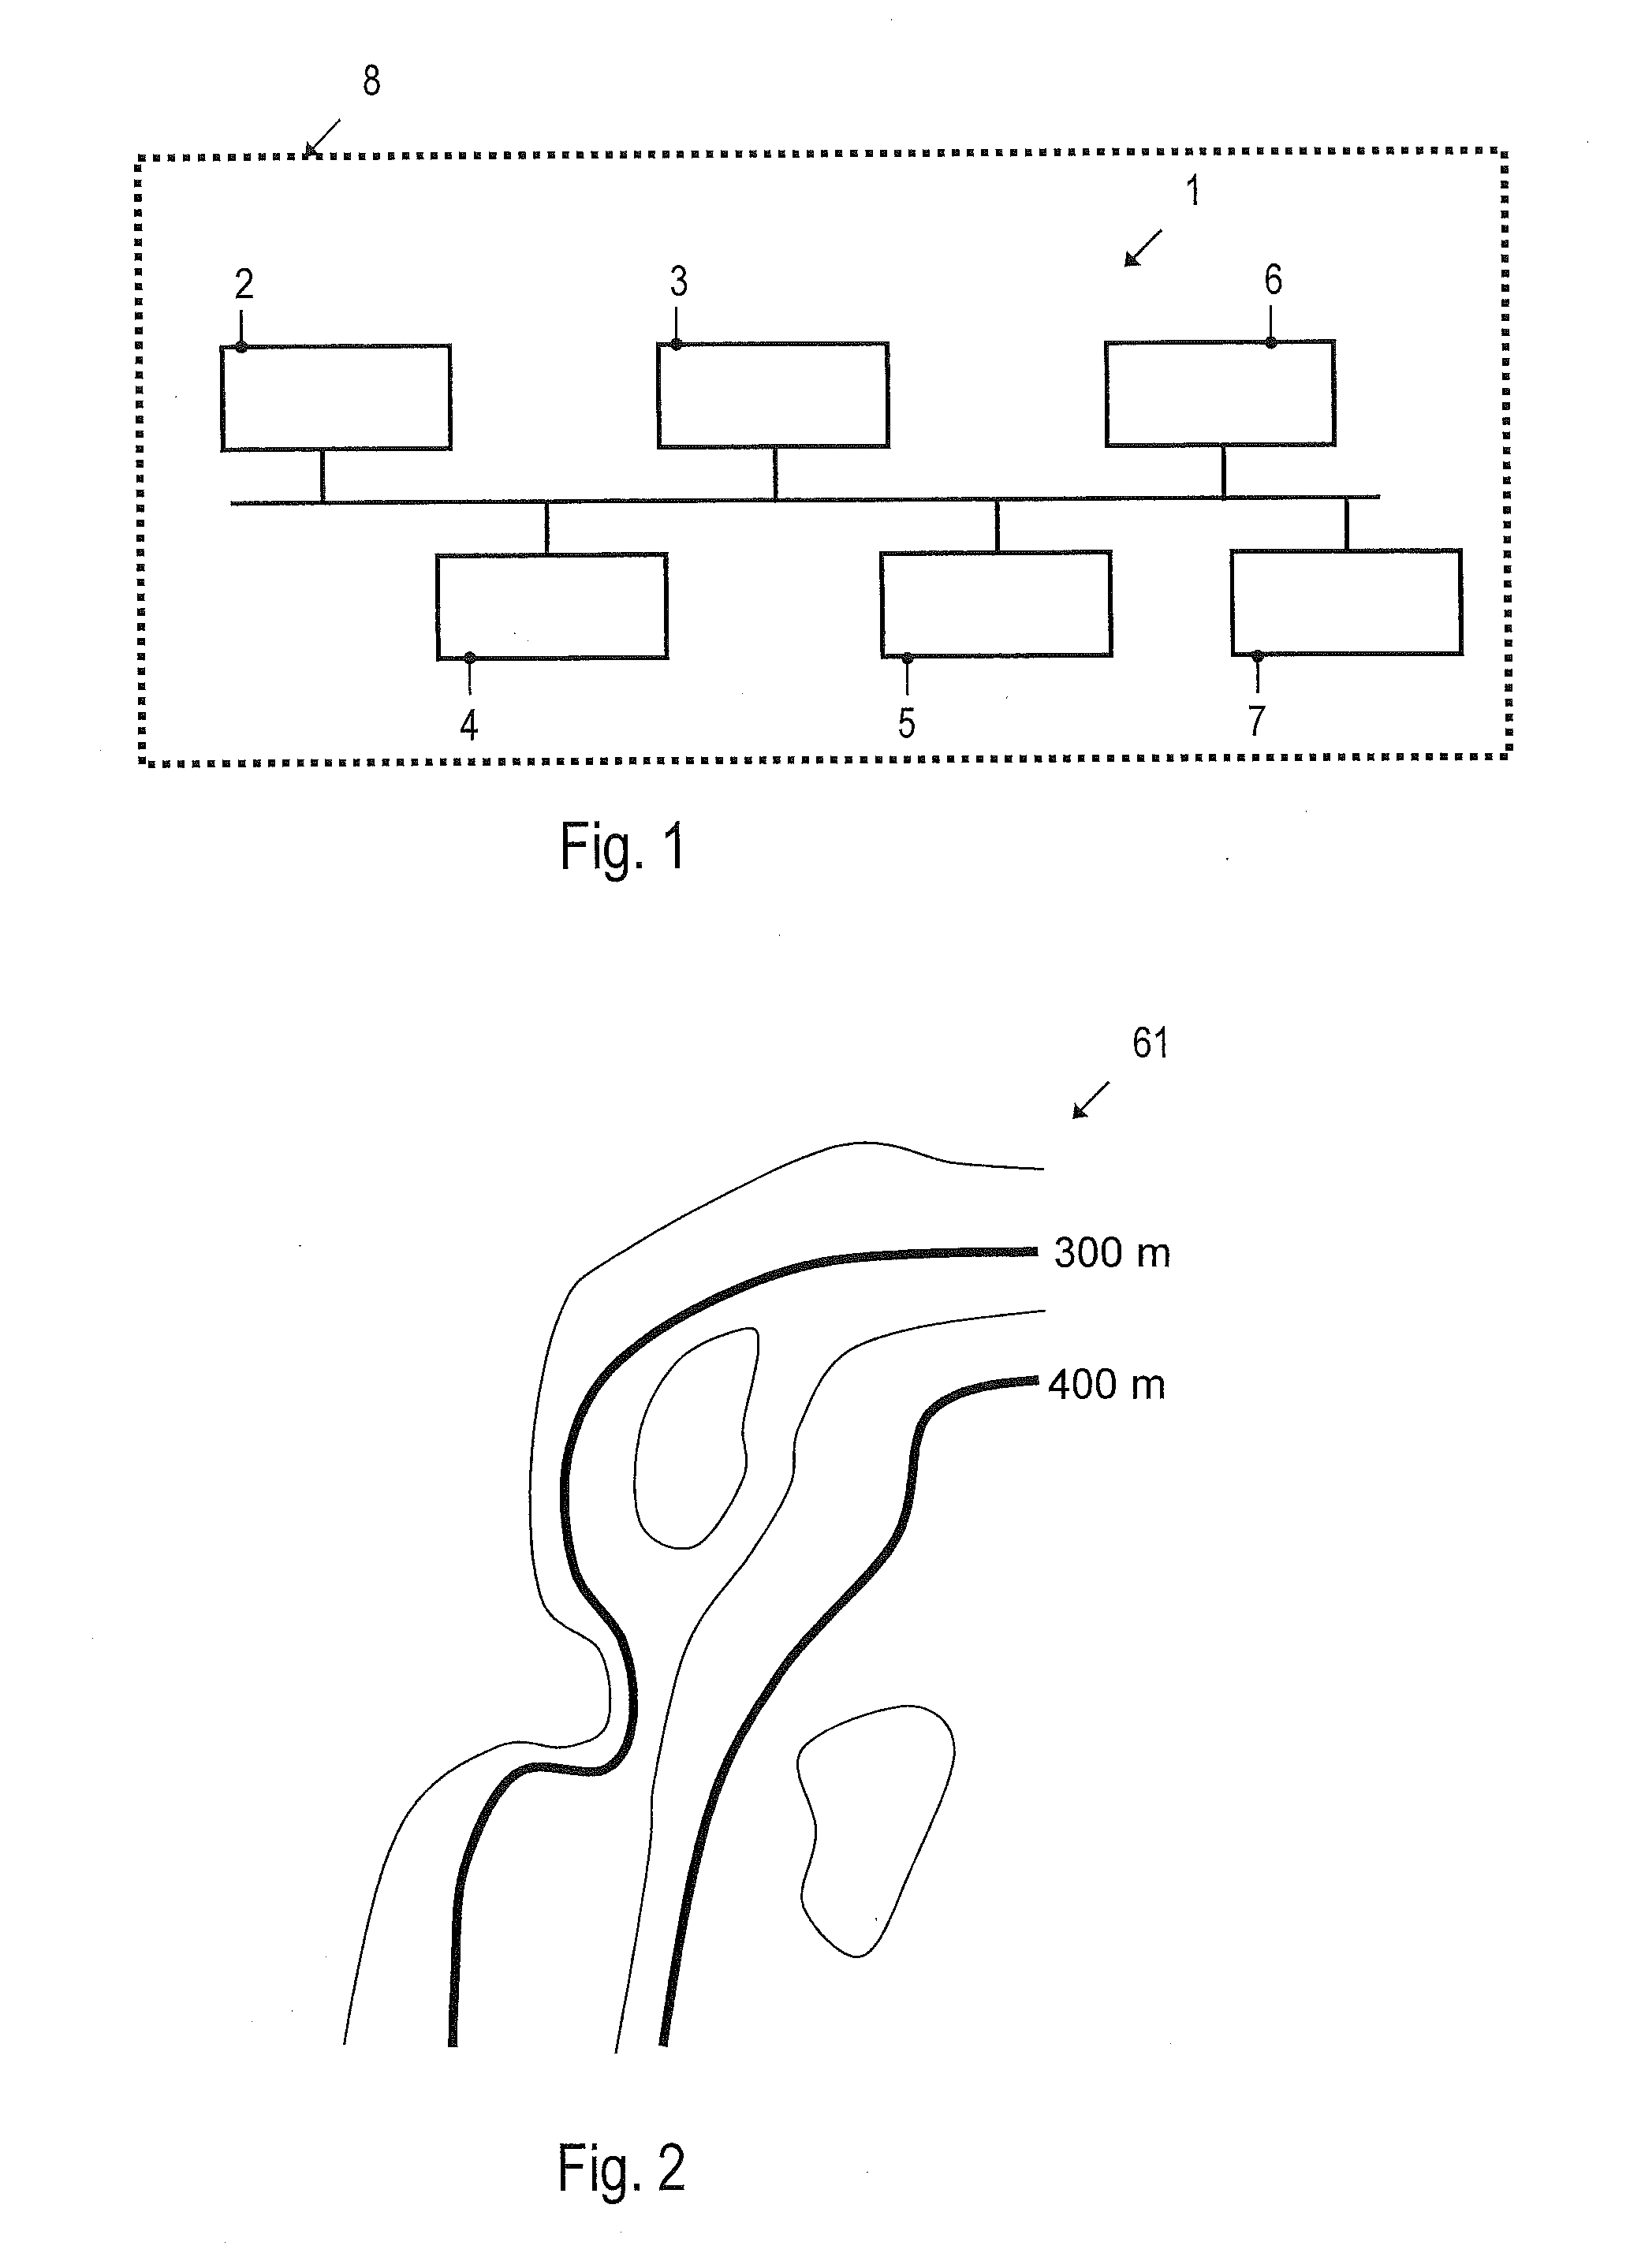 Navigation device, method of predicting a visibility of a triangular face in an electronic map view, and method for generating a database